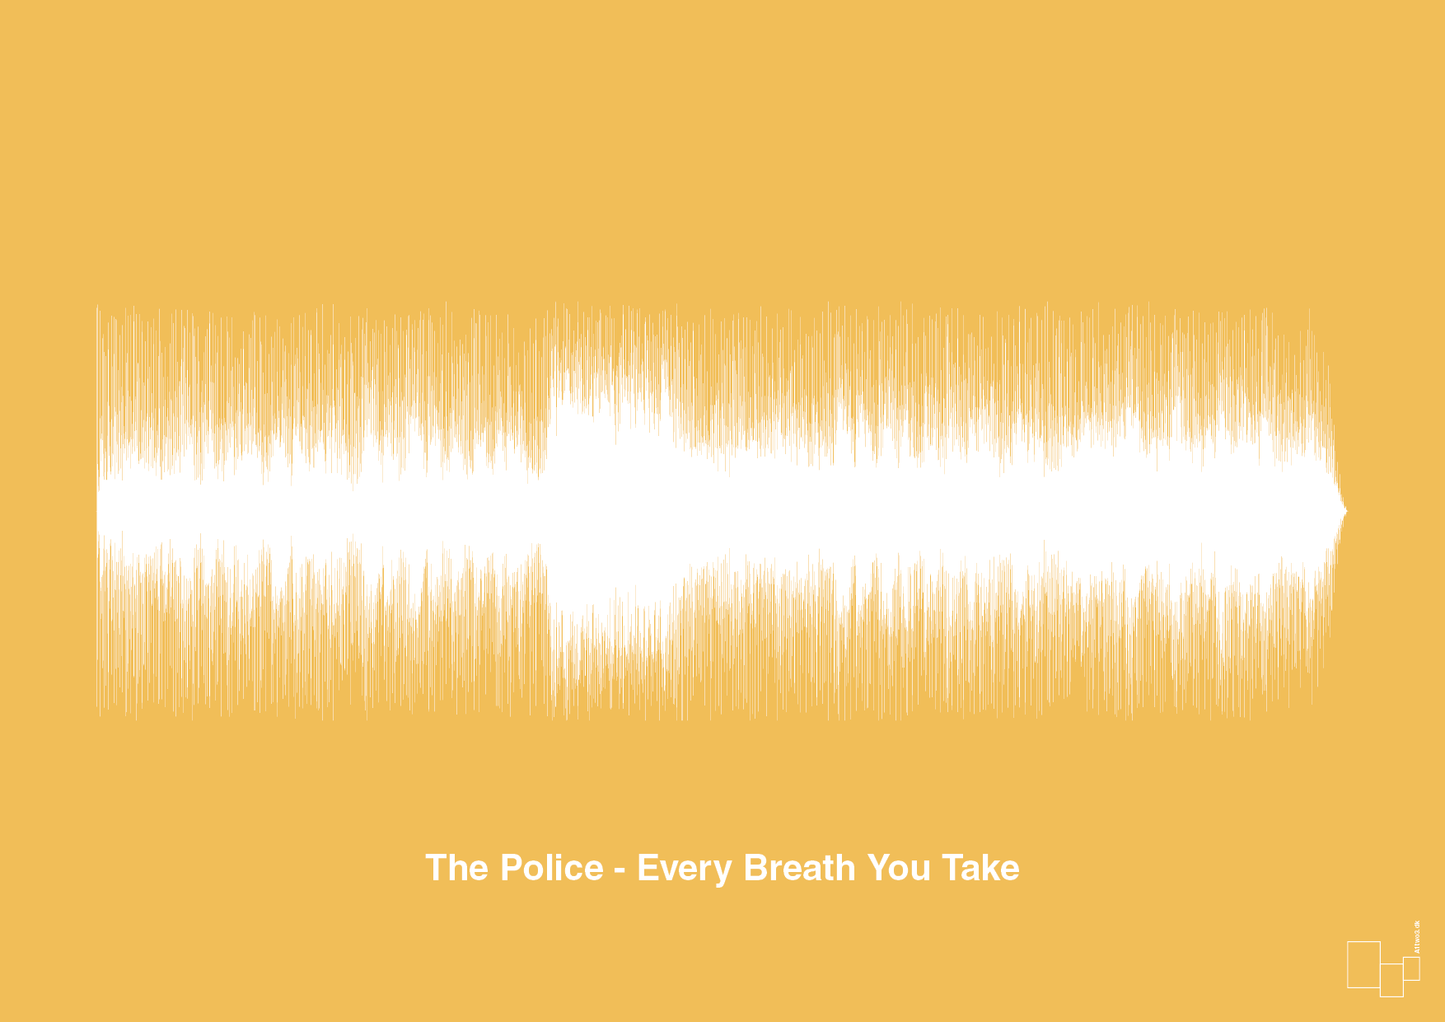 the police - every breath you take - Plakat med Musik i Honeycomb